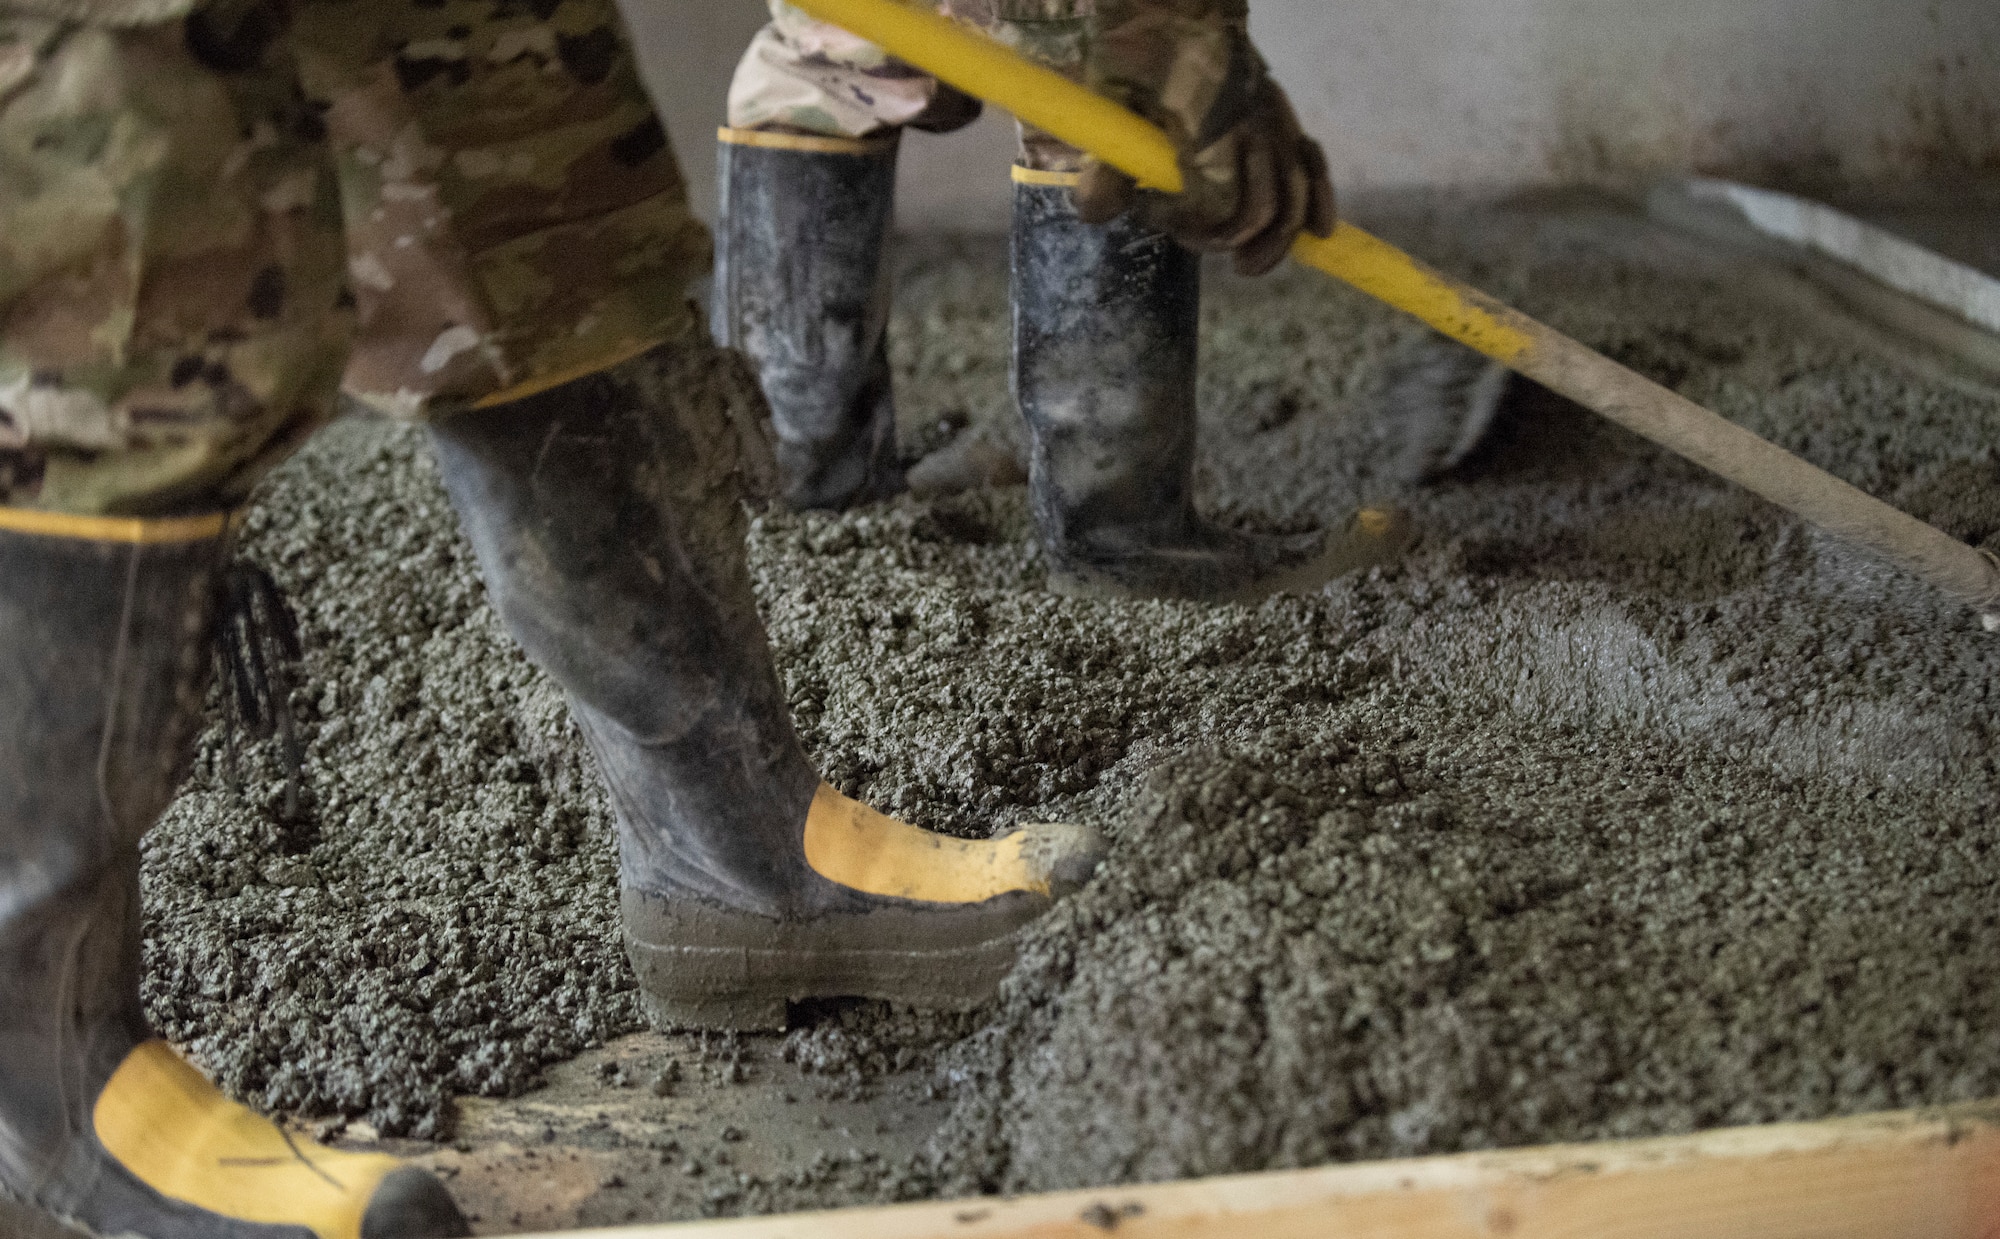 Dirt Boys from the 379th Expeditionary Civil Engineer Squadron level out concrete after being placed inside the Independence Dining Facility on Aug. 22, 2019 at Al Udeid Air Base, Qatar.